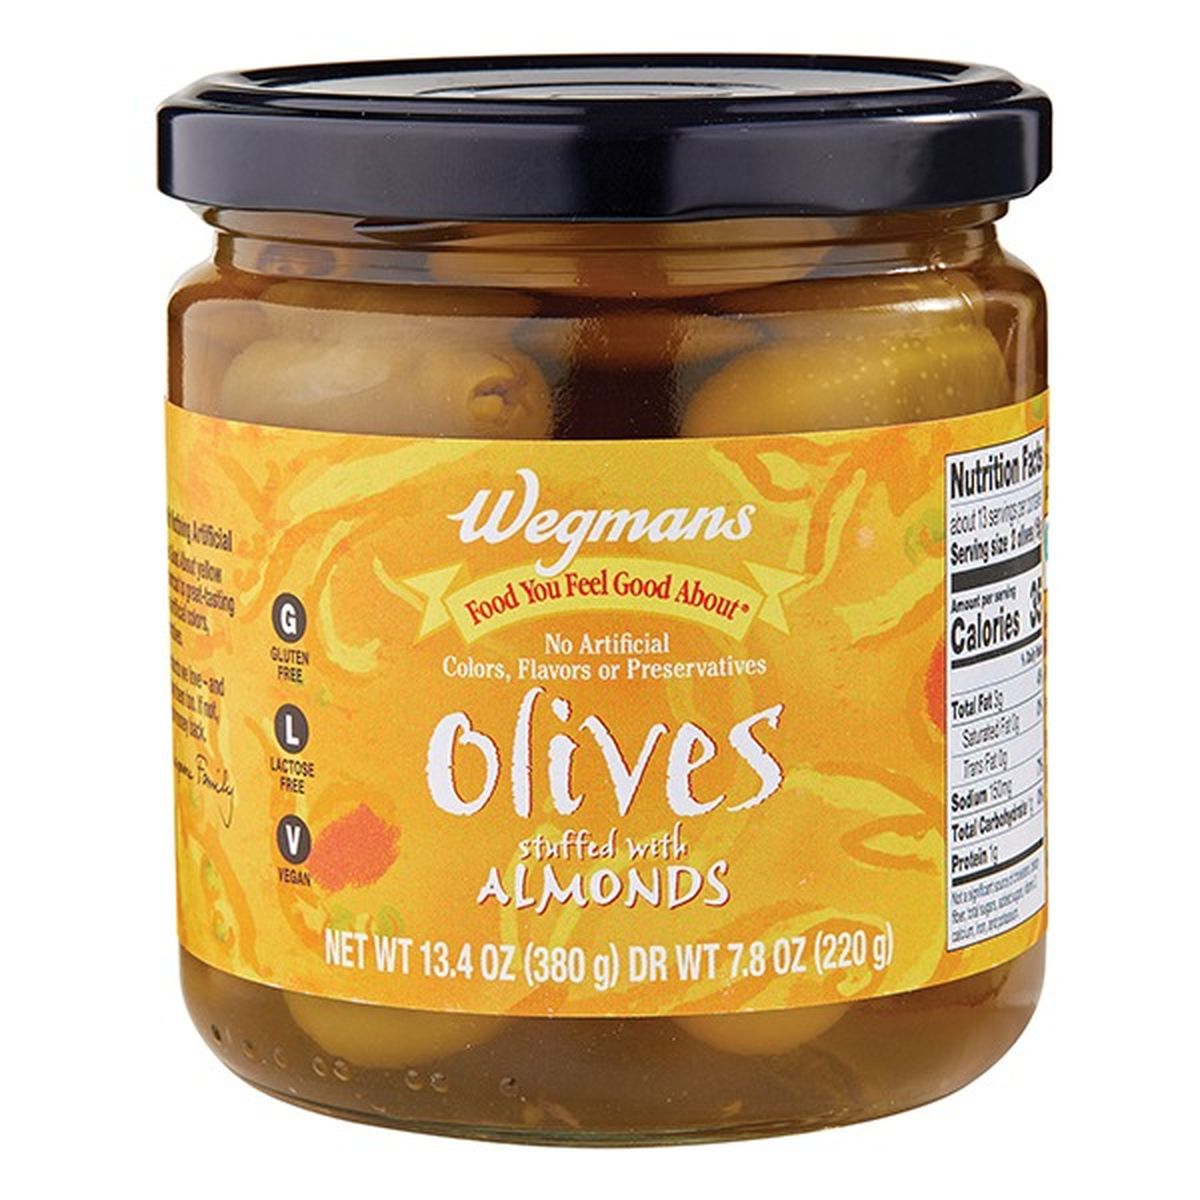 Calories in Wegmans Olives, Stuffed with Almonds